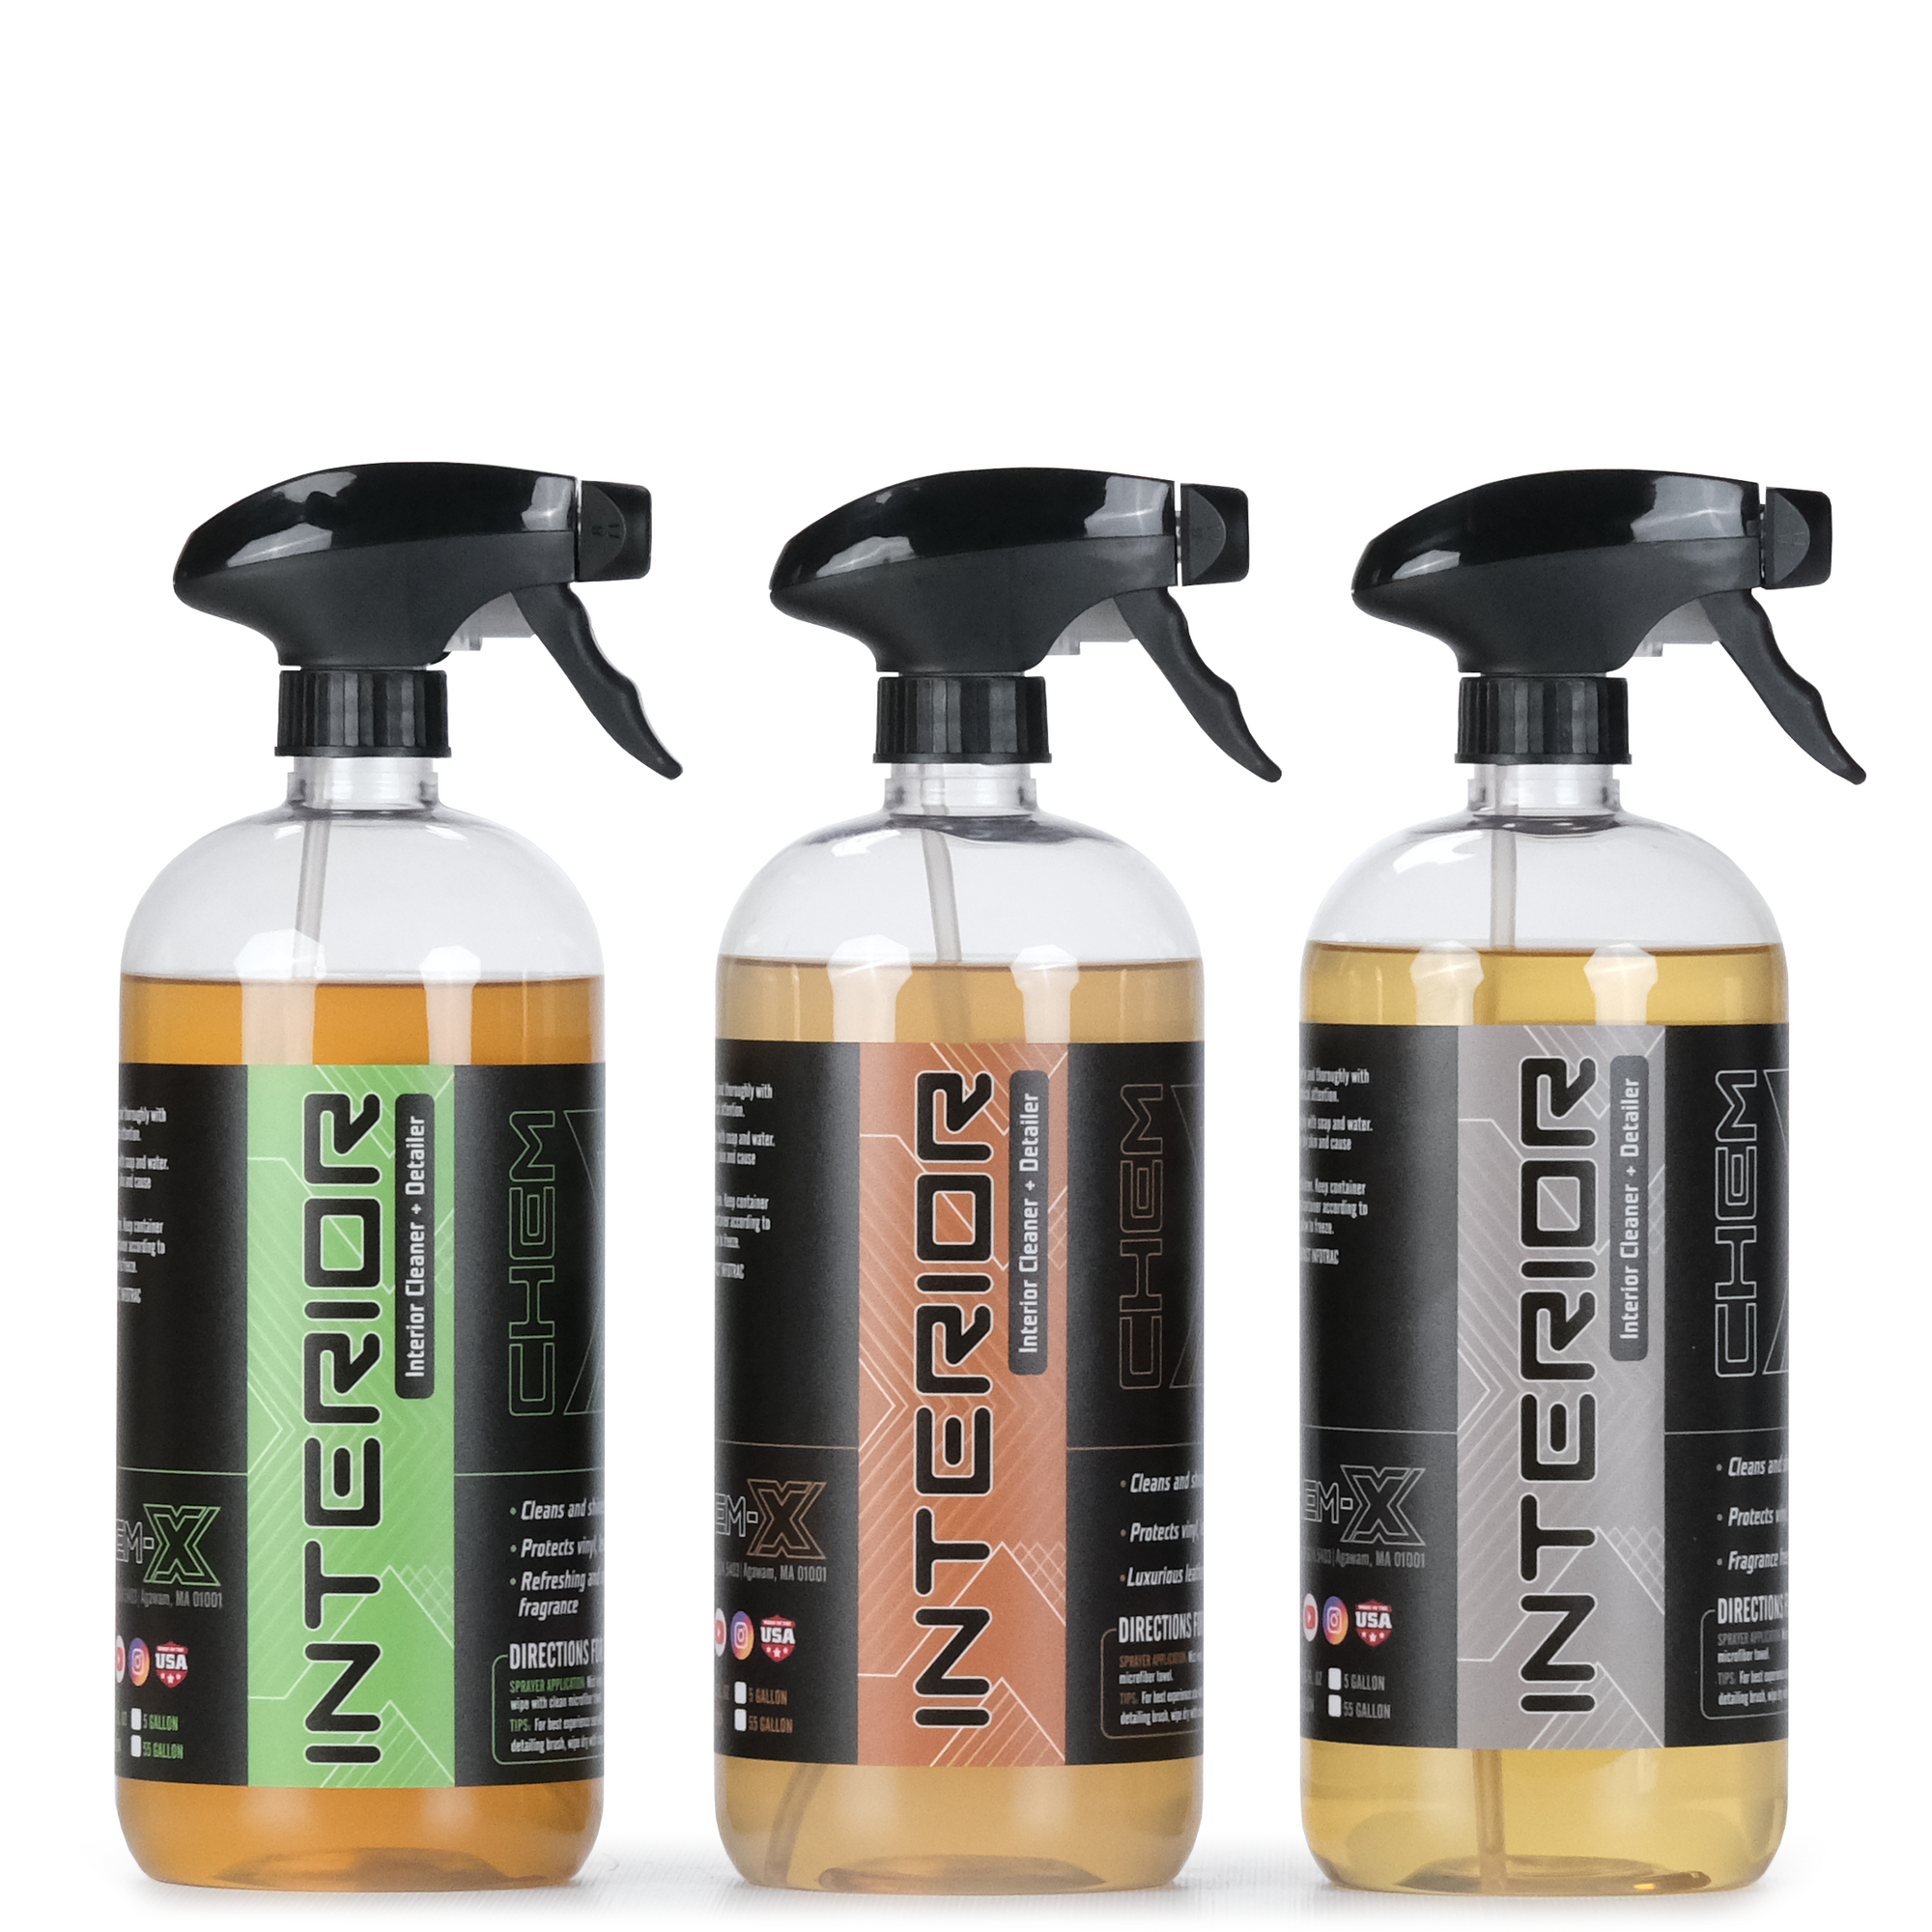 What Chemical Guys products are actually good? : r/AutoDetailing